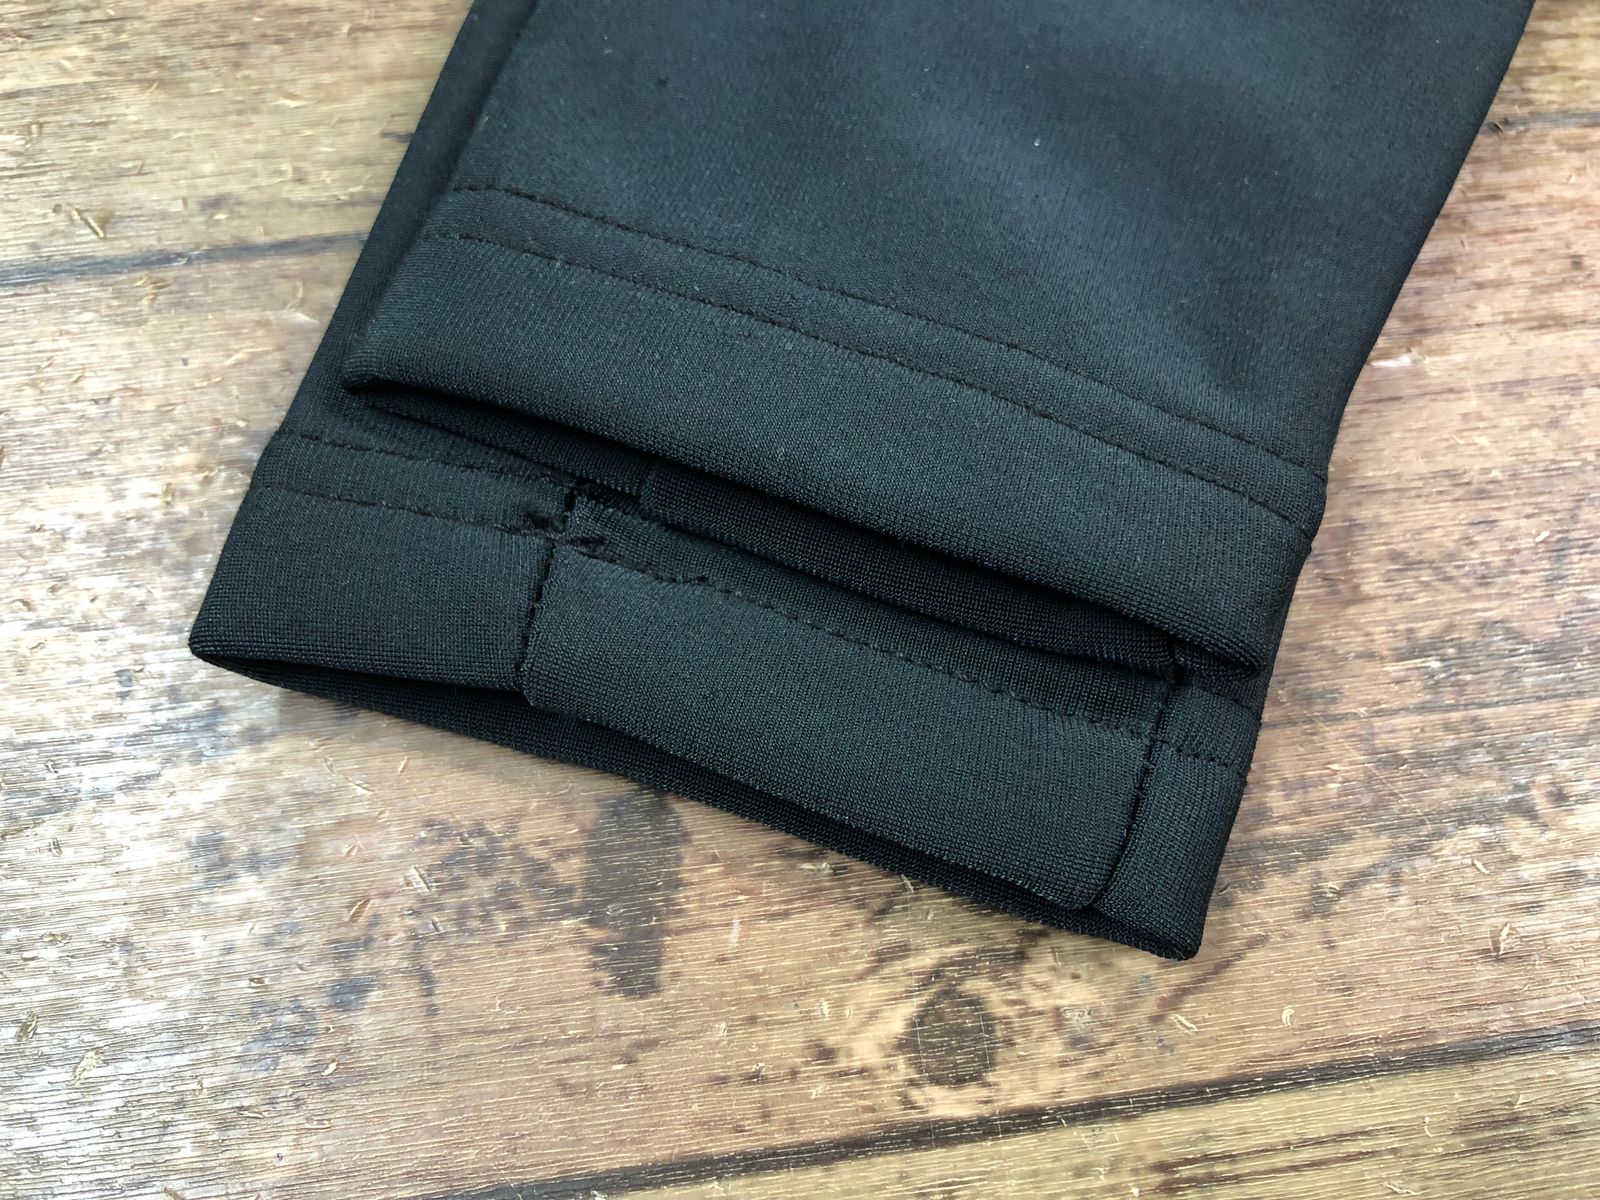 HO320 スペシャライズド SPECIALIZED THERMAL ARM WARMER アームウォーマー 黒 S 裏起毛